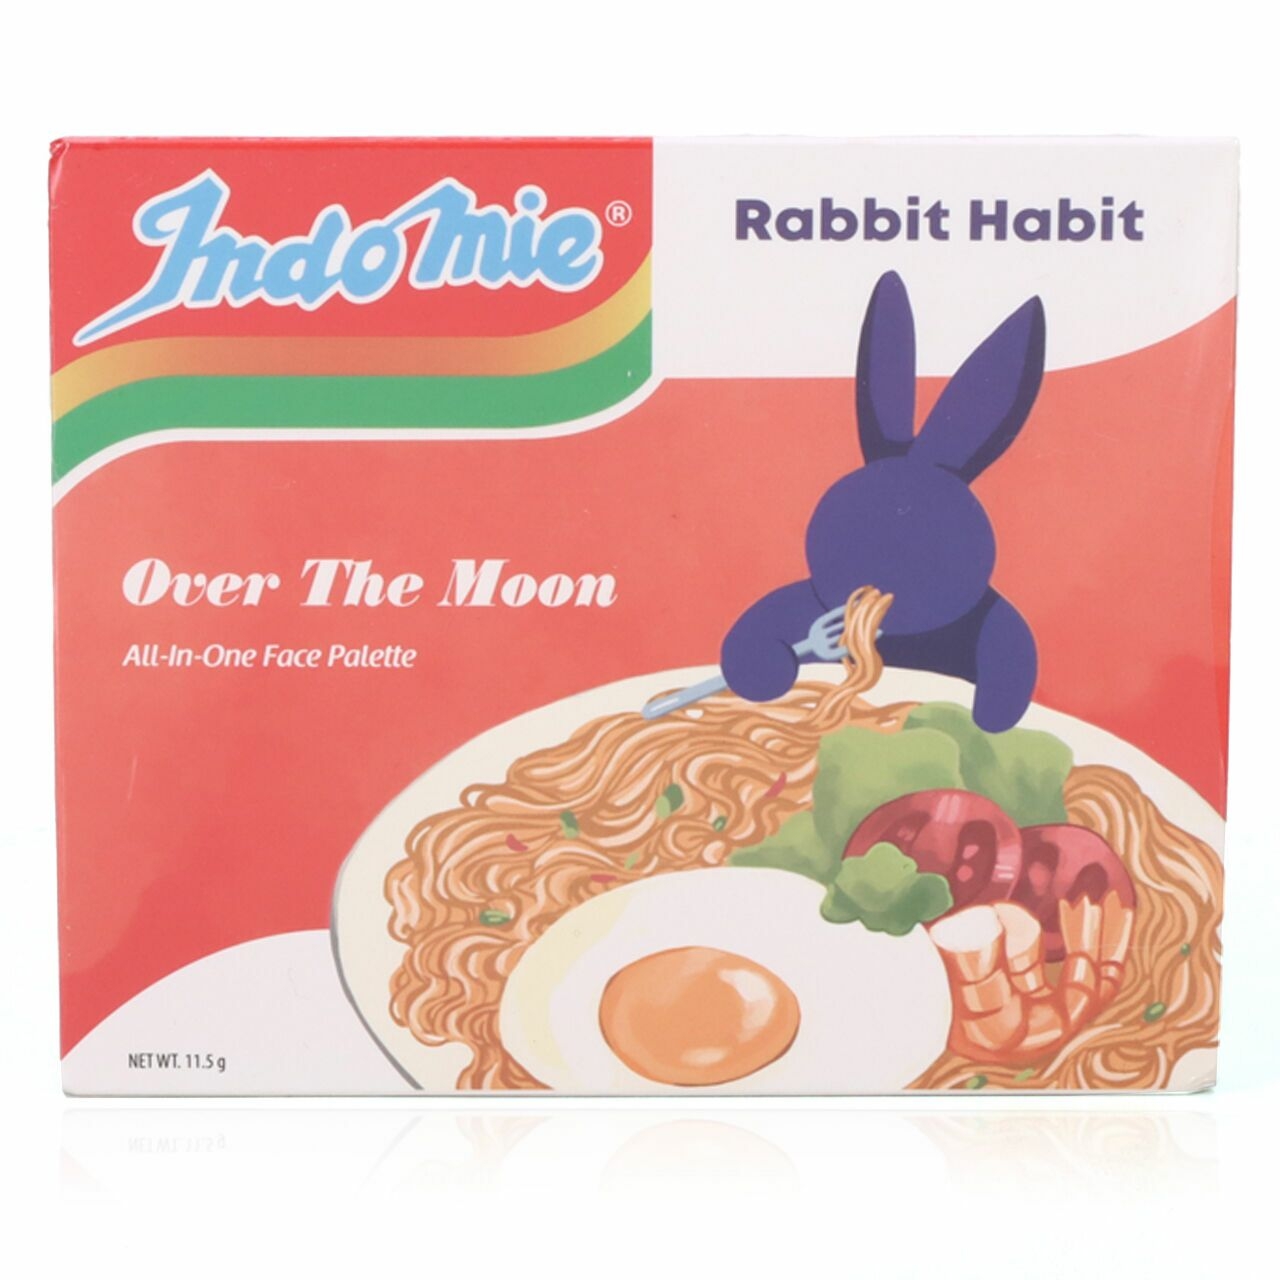 Rabbit Habit x Indomie Over The Moon All-In-One Face Palette